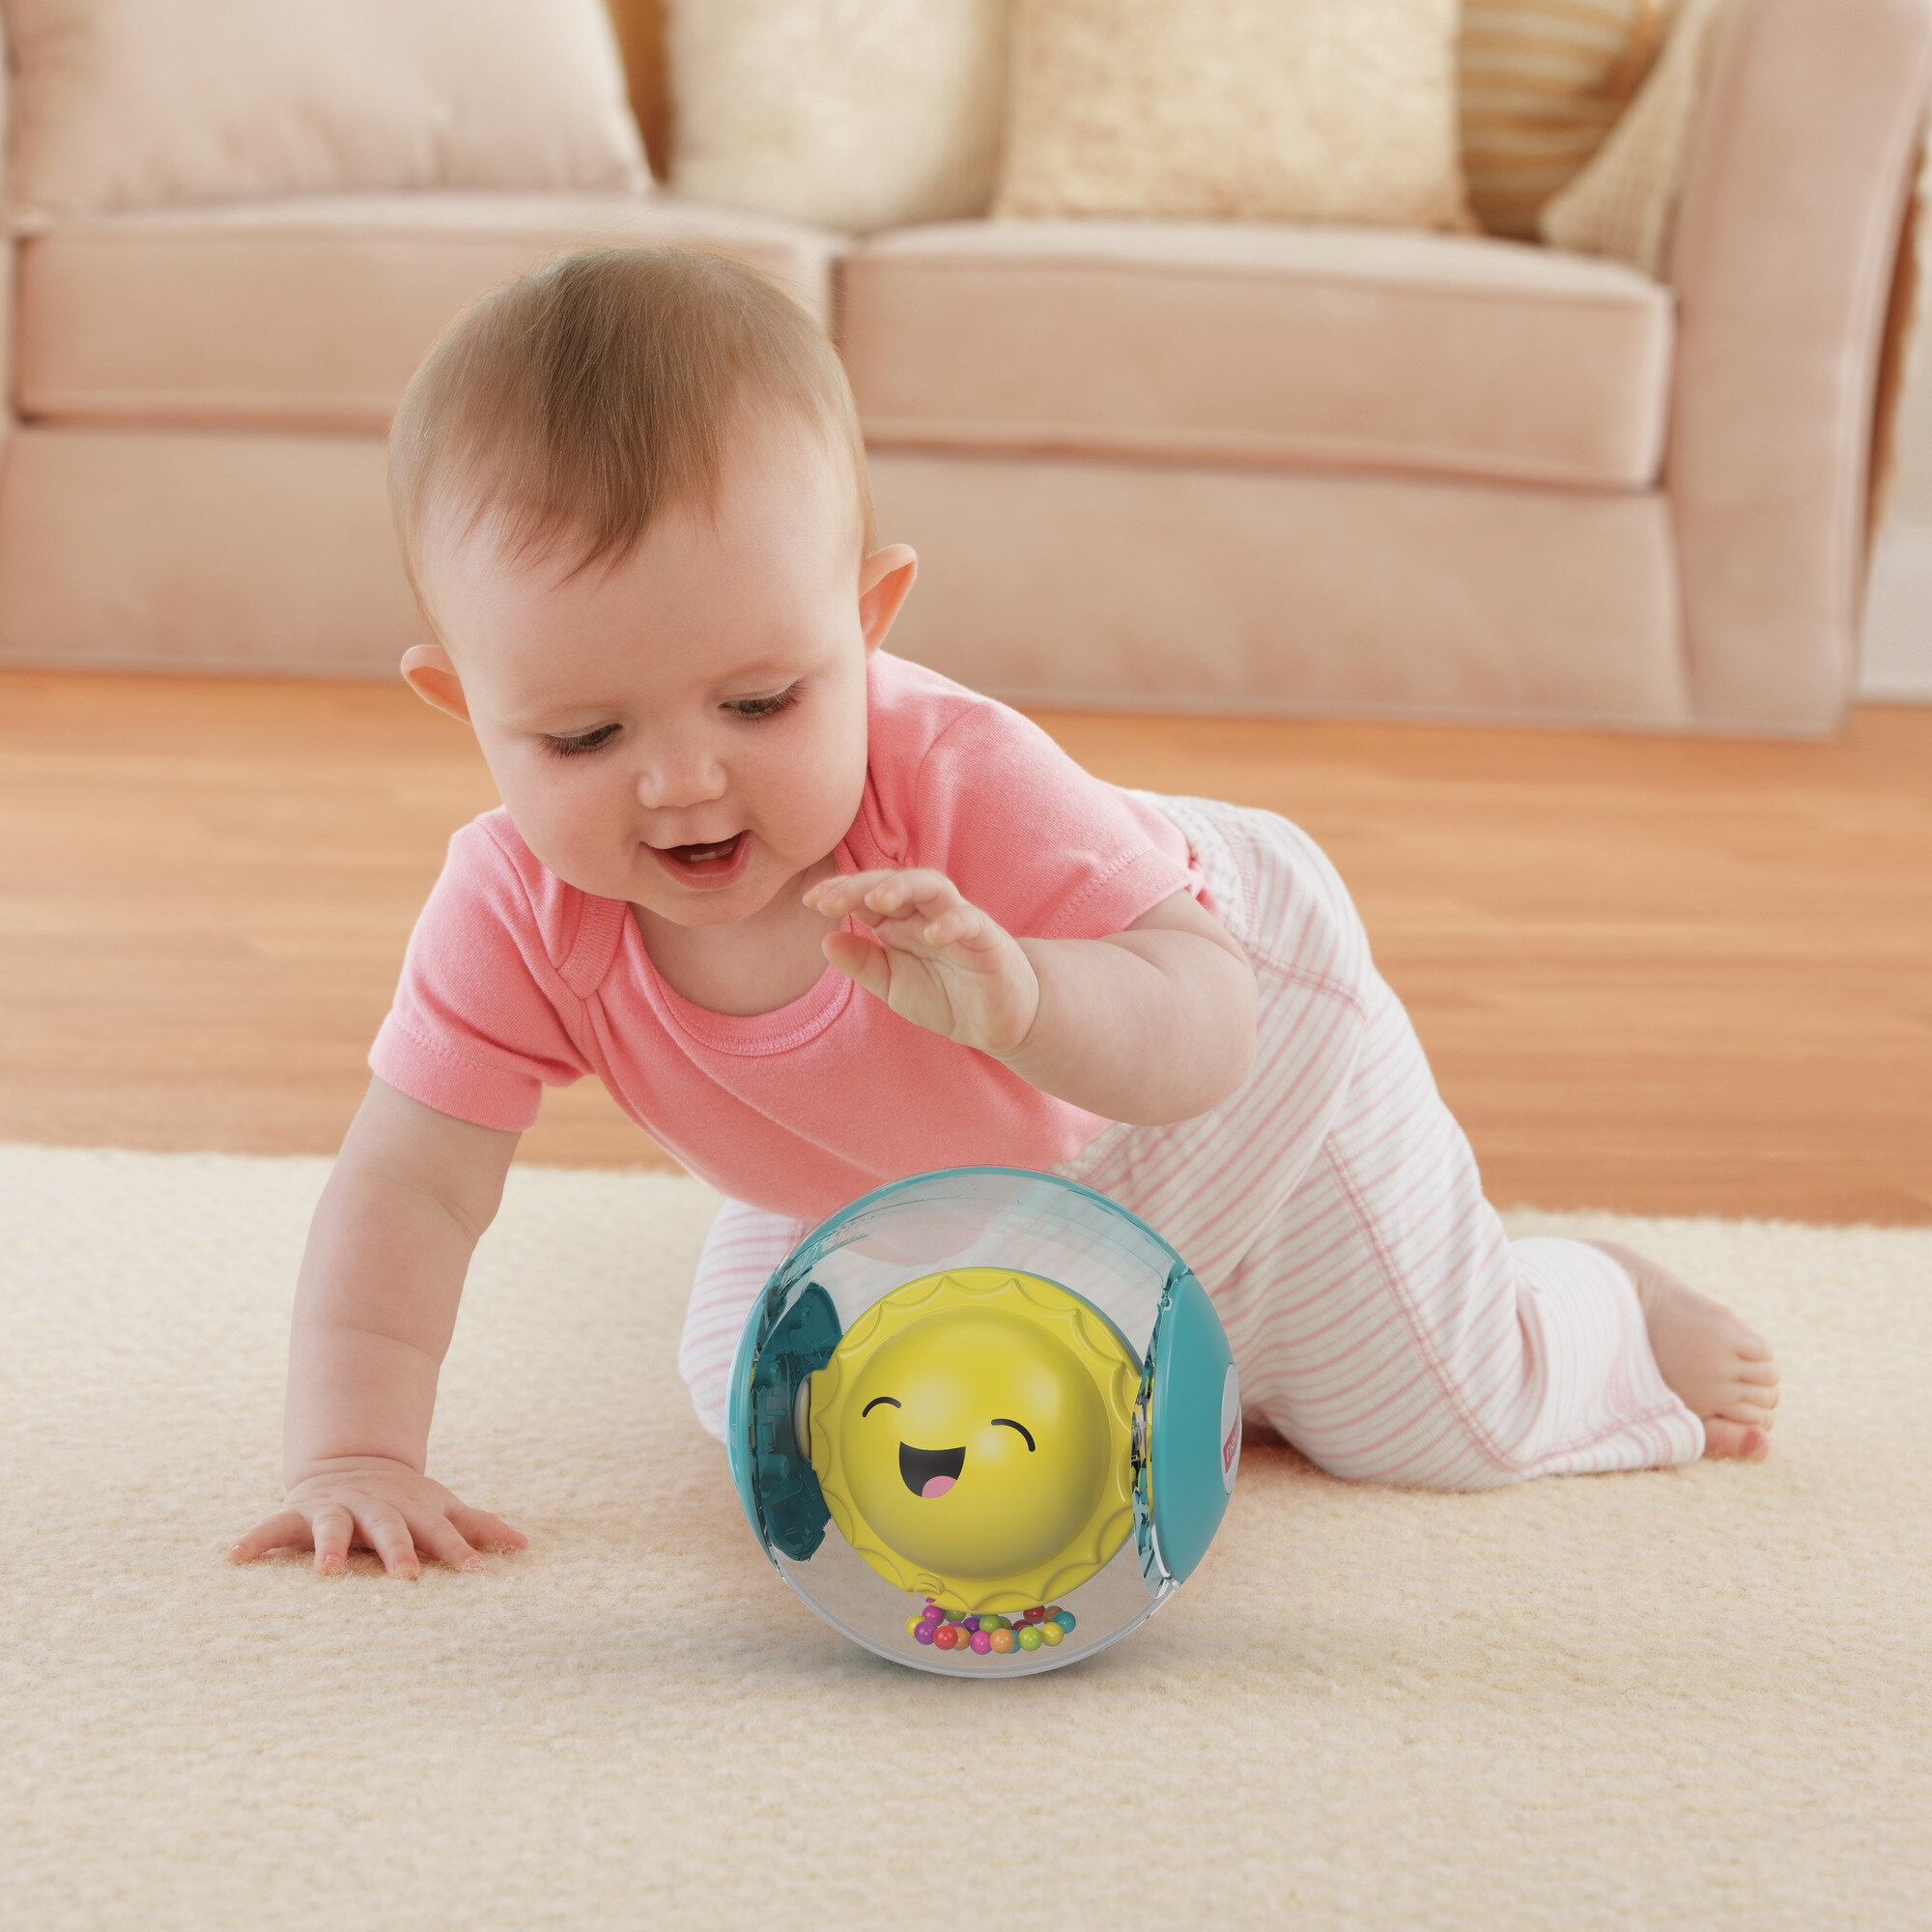 Fisher-Price Hello Sunshine Rattle Ball with Rainbow-Colored Beads - image 2 of 4